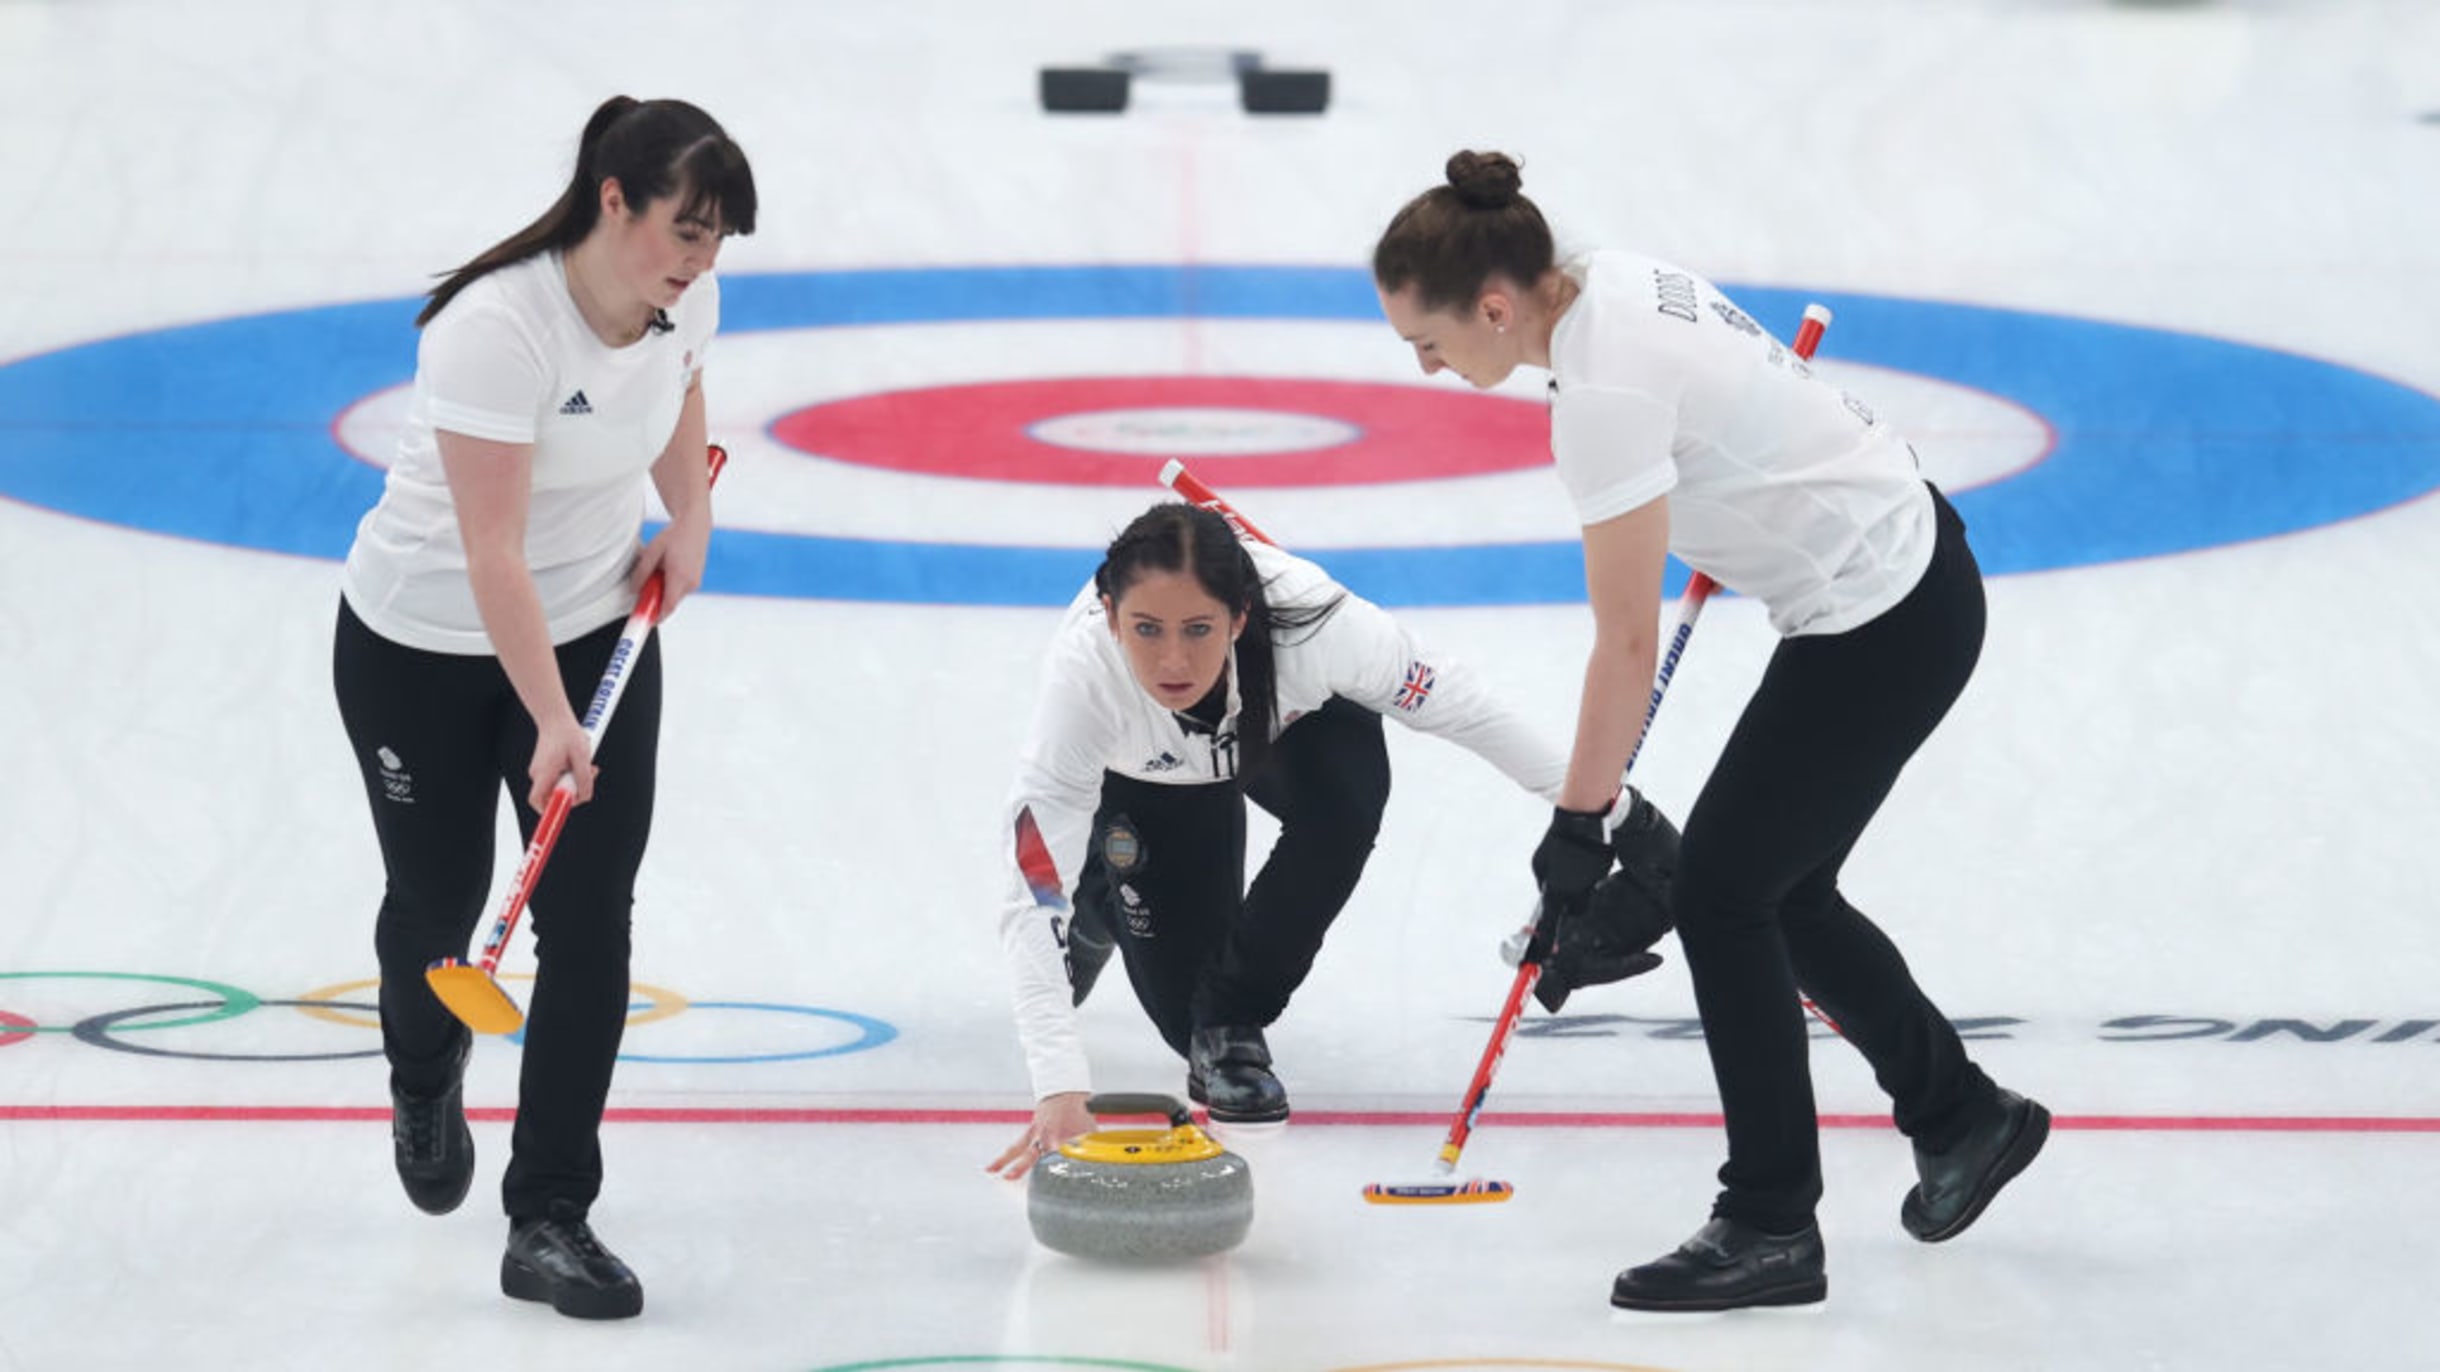 Muirhead and Team GB dominate Japan for womens curling gold